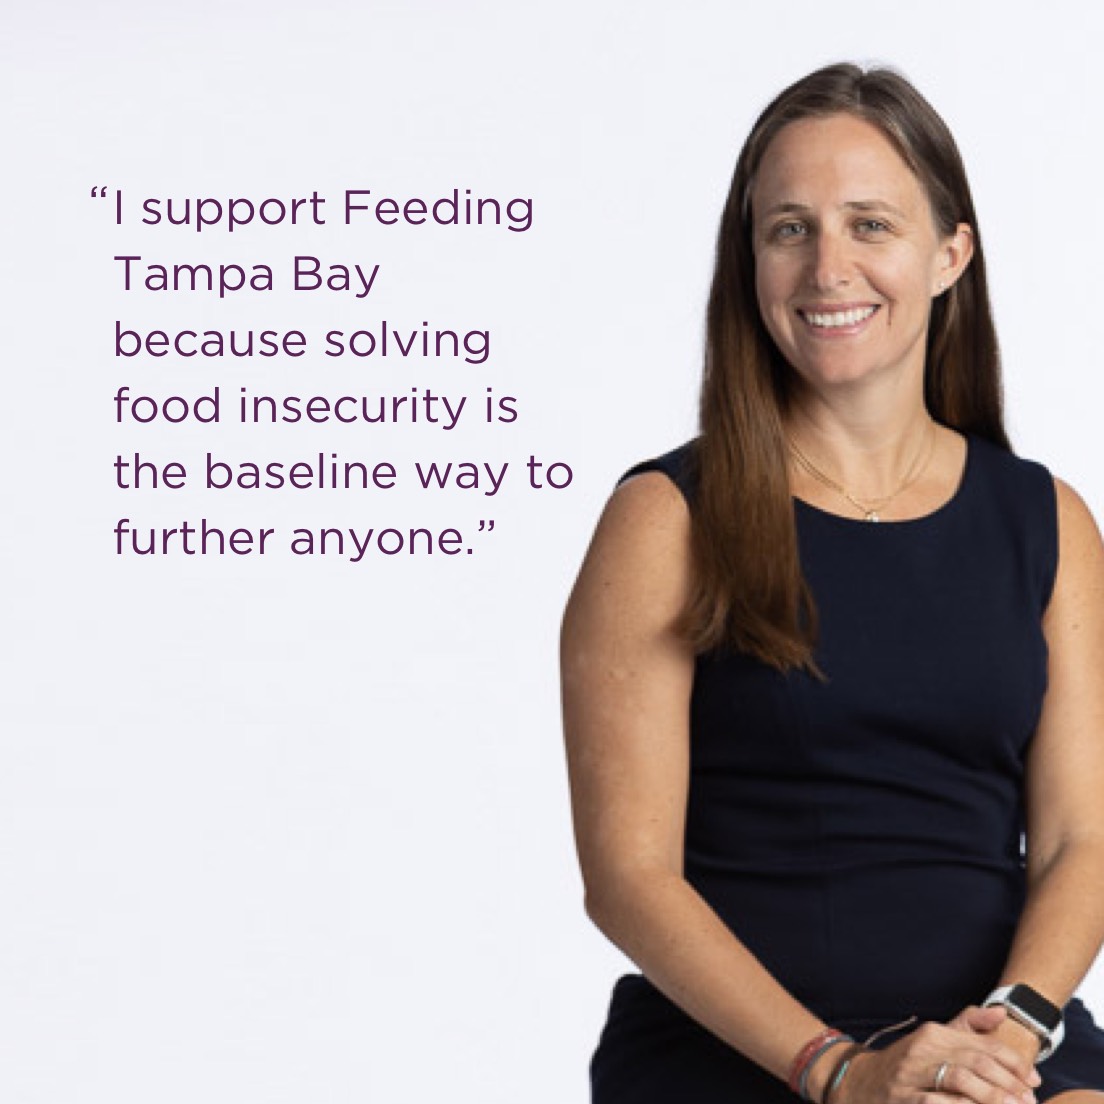 Anna Wiand - "I support Feeding Tampa Bay because solving food insecurity is the baseline way to further anyone.”